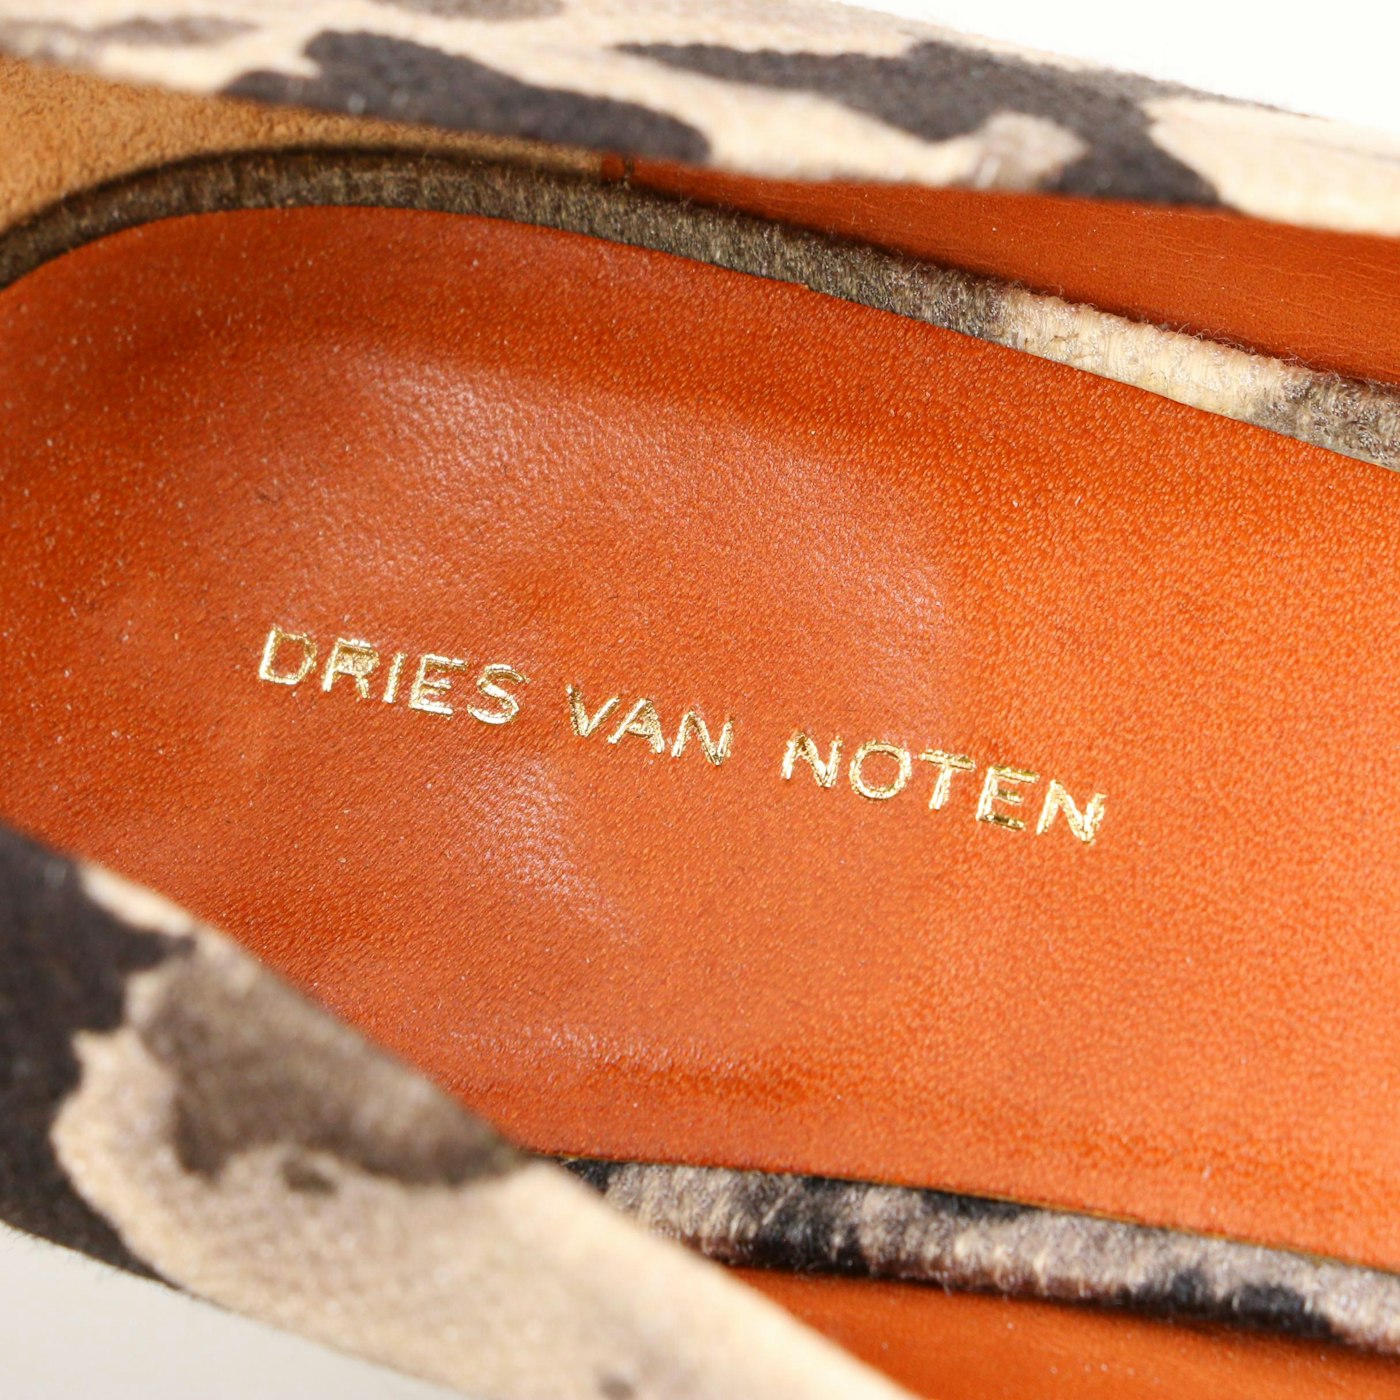 Dries Van Noten Pumps in Printed Textile with Snake-Embossed Leather ...